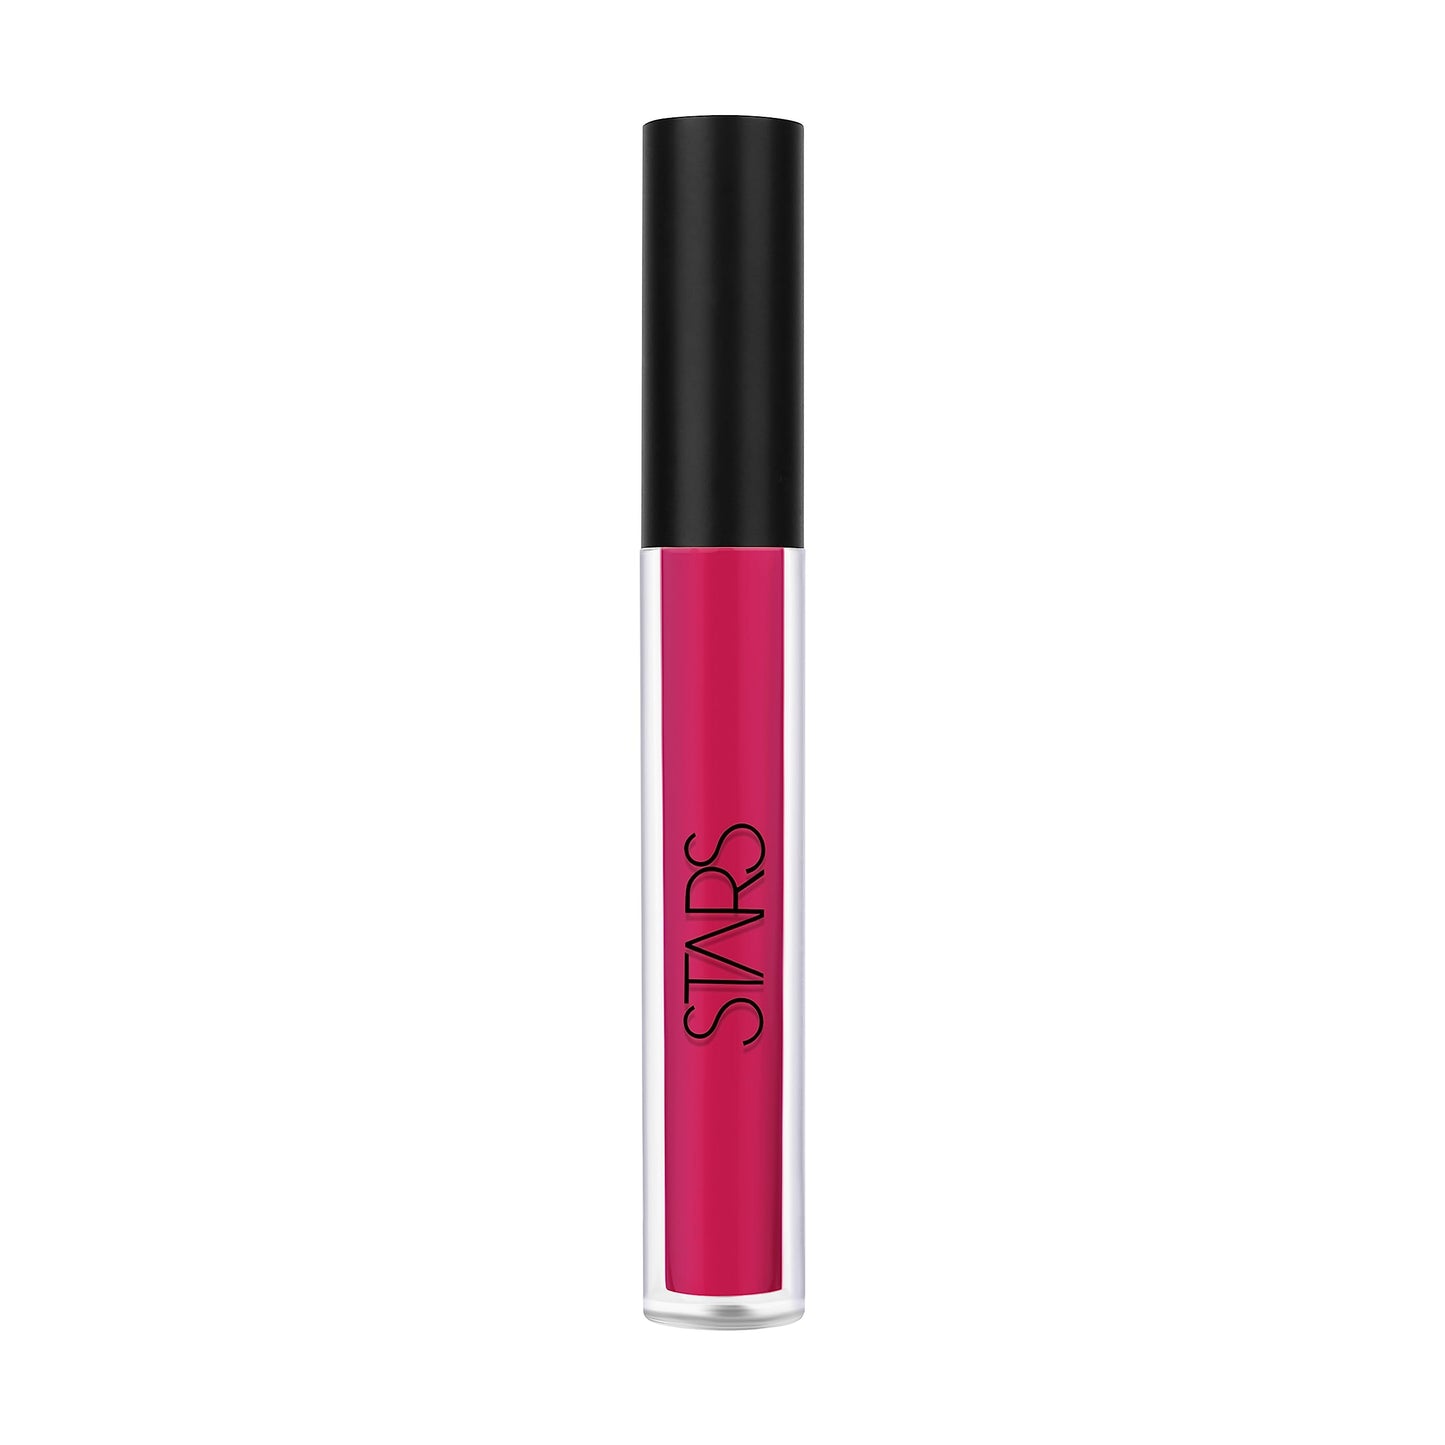 Star's Cosmetics Lip Pop Liquid Lipstick, Light Weight, Long Lasting, Water Proof, Smudge Proof & Transfer Proof, Highly Pigmented, Matte Finish Lipstick For Girl & Women, (No.11 Wine) 2.6ml